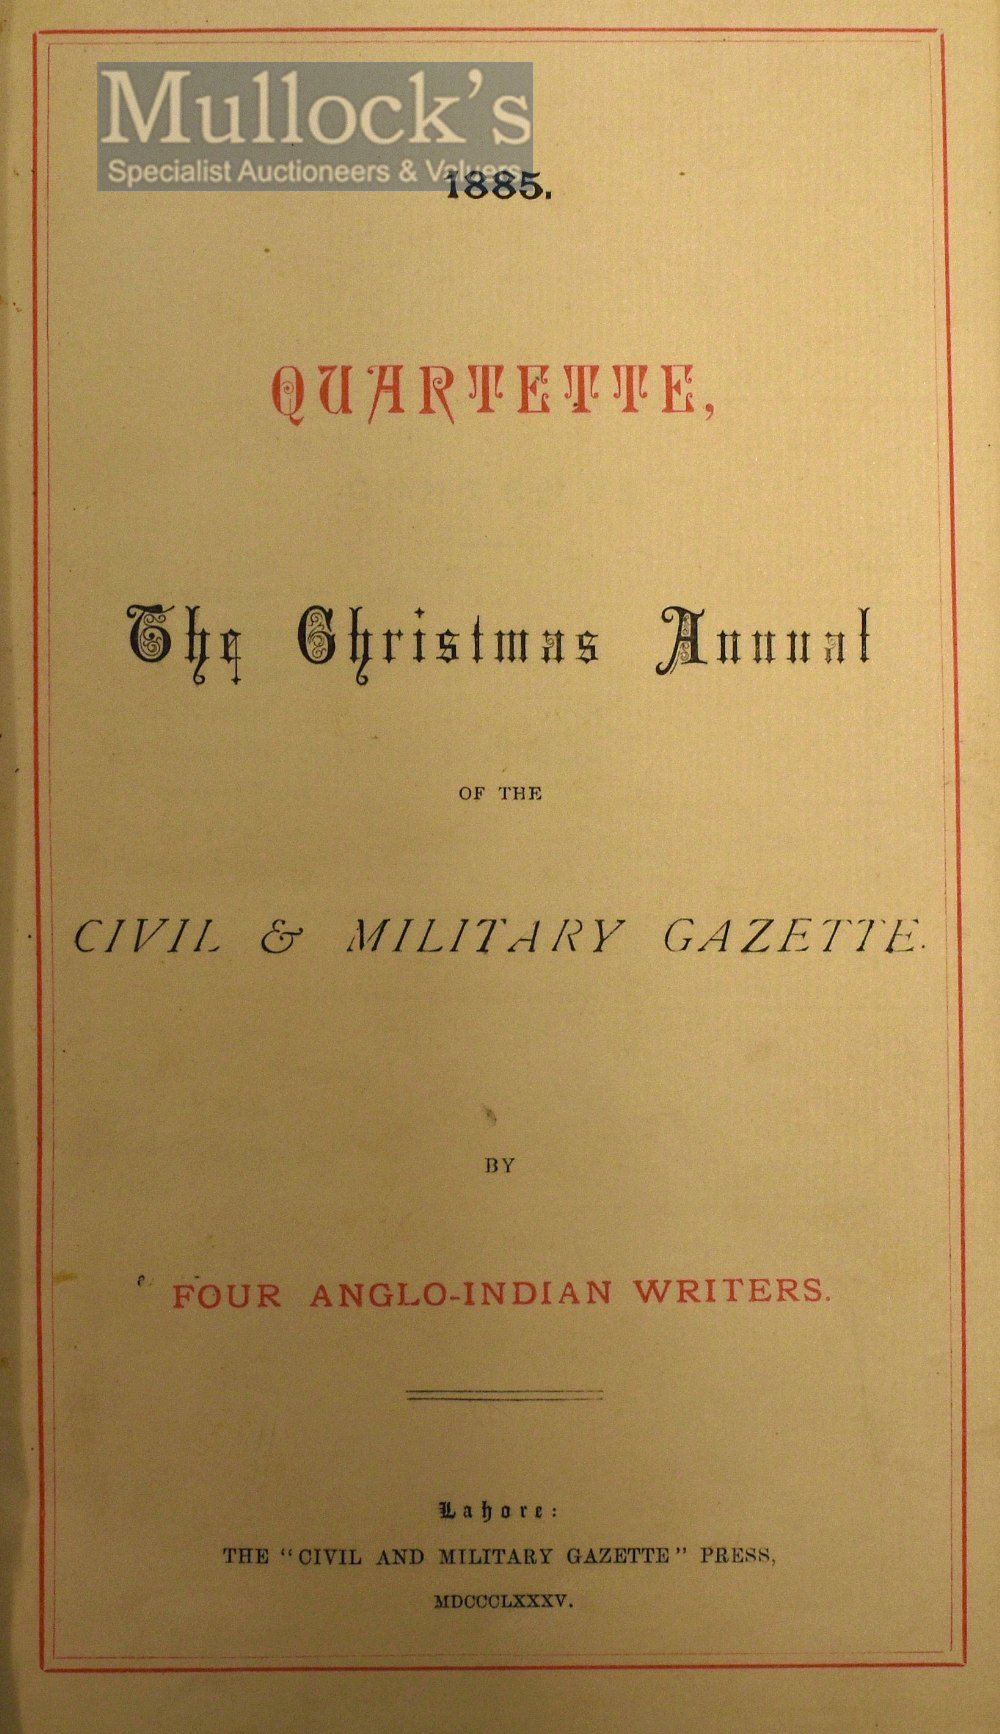 1885 Quartette – The Christmas Annual Of The Civil & Military Gazette - By Four Anglo-Indian